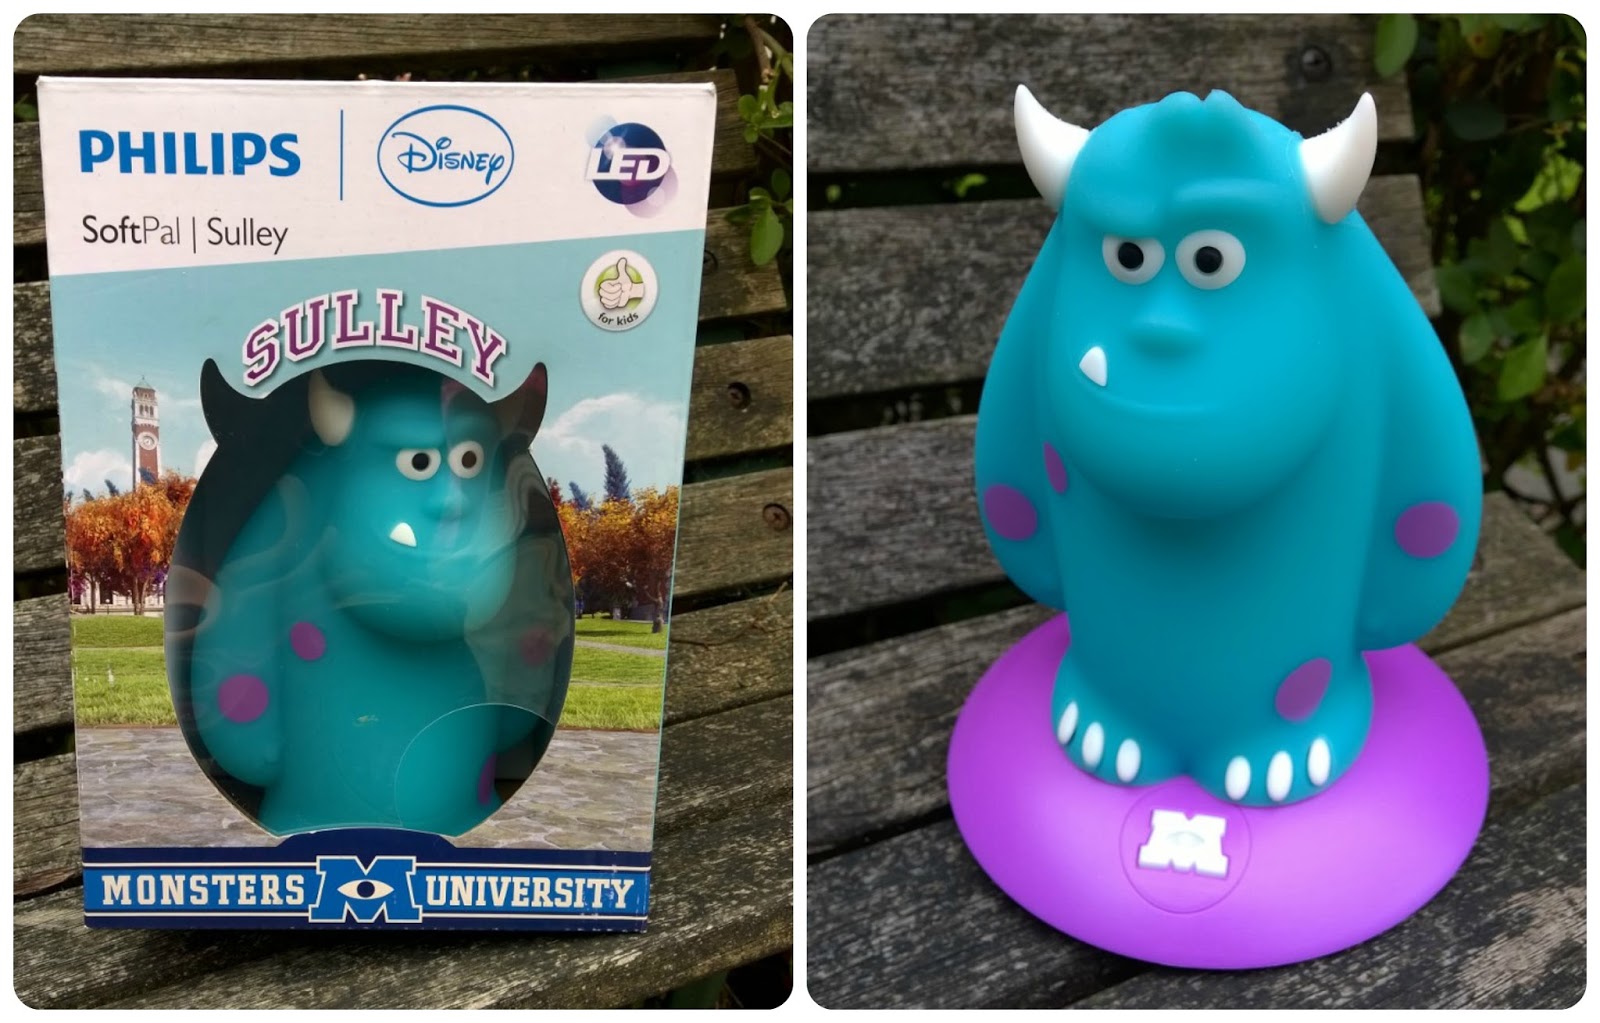 Philips SoftPal Sully